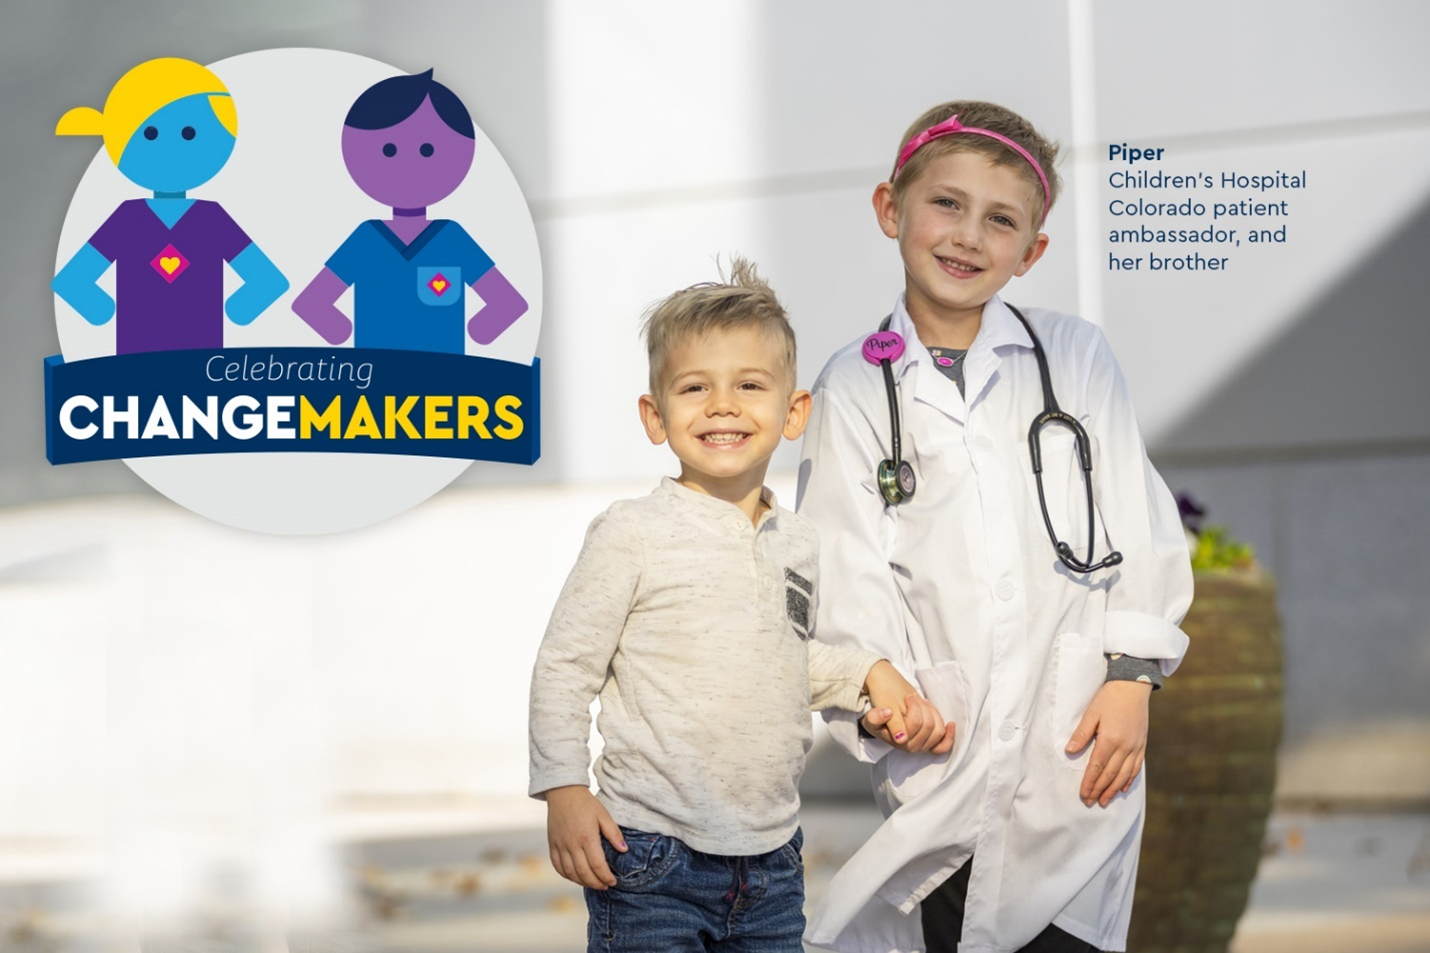 Celebrating Changemakers colorful cartoon logo of healthcare providers, overlaid on picture of patient ambassador Piper dressed up as a doctor and holding hands with her younger brother